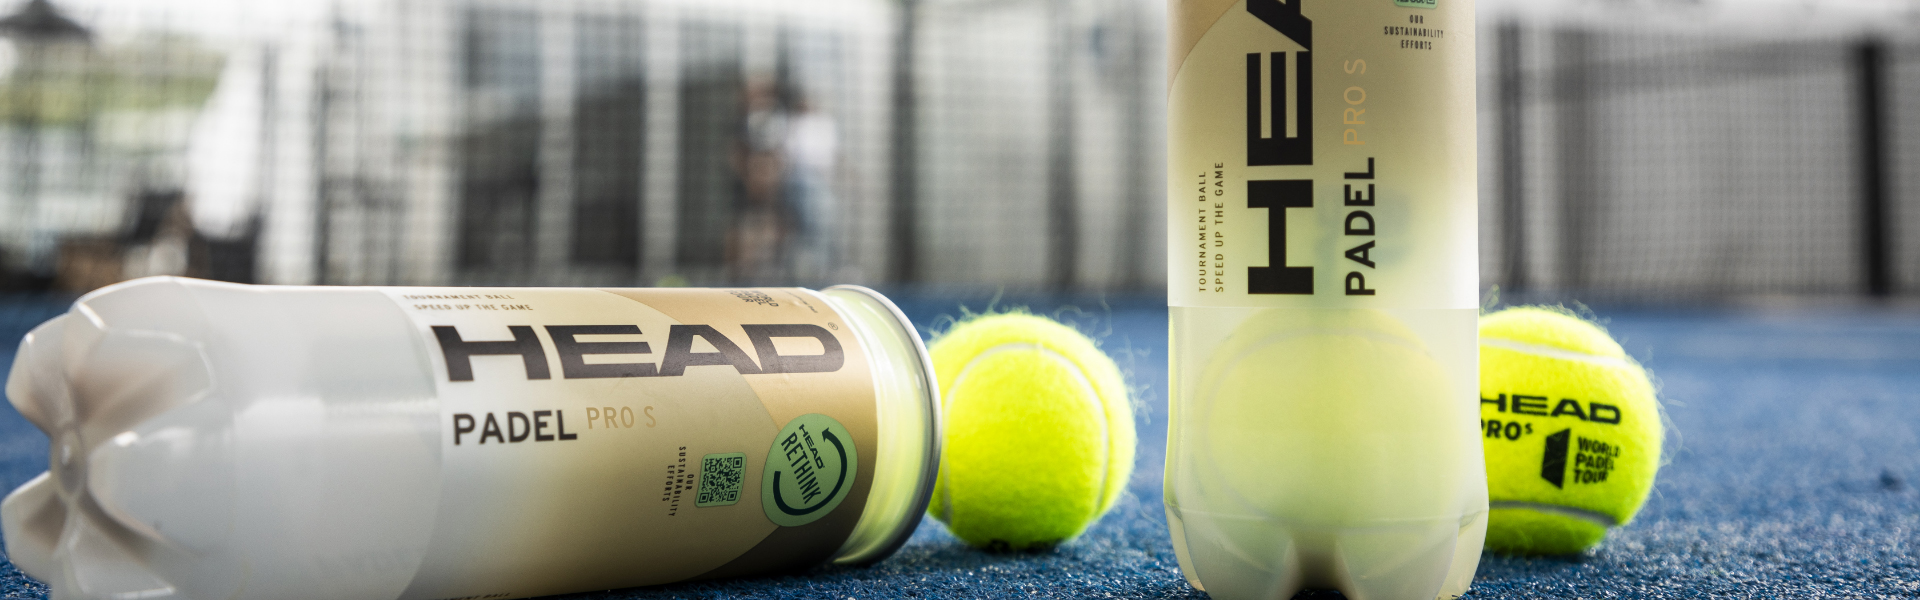 HEAD PADEL BALL DIVISION AND WORLD PADEL TOUR END 11 SUCCESSFUL YEARS OF COLLABORATION